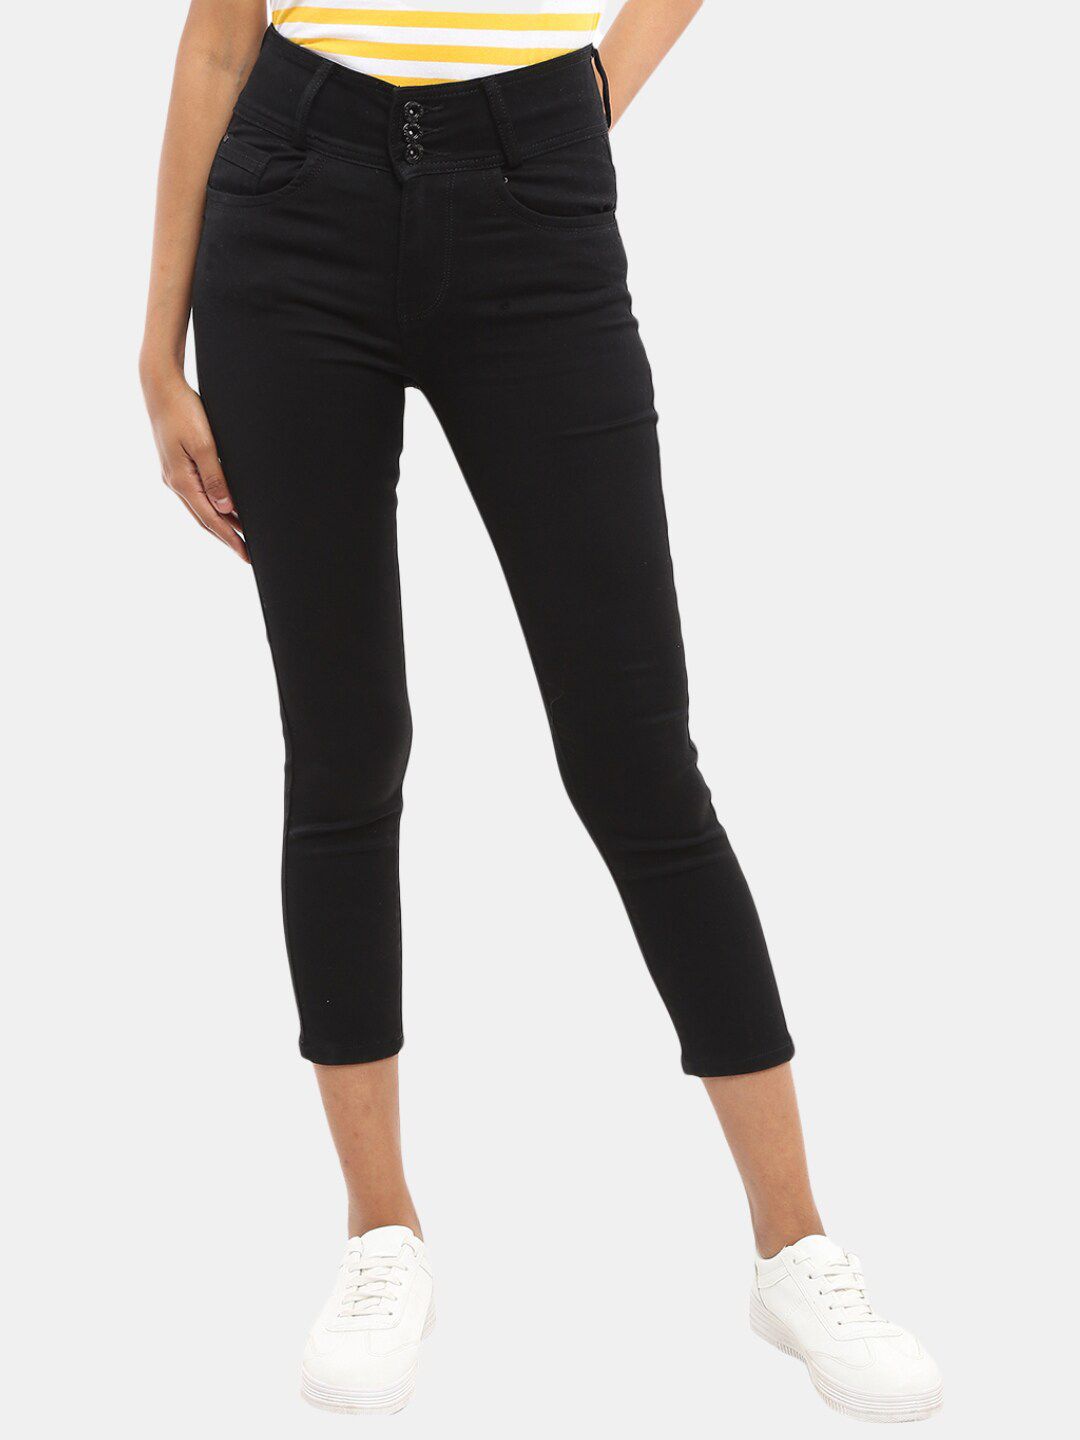 V-Mart Women Black Stretchable Mid-RiseJeans Price in India